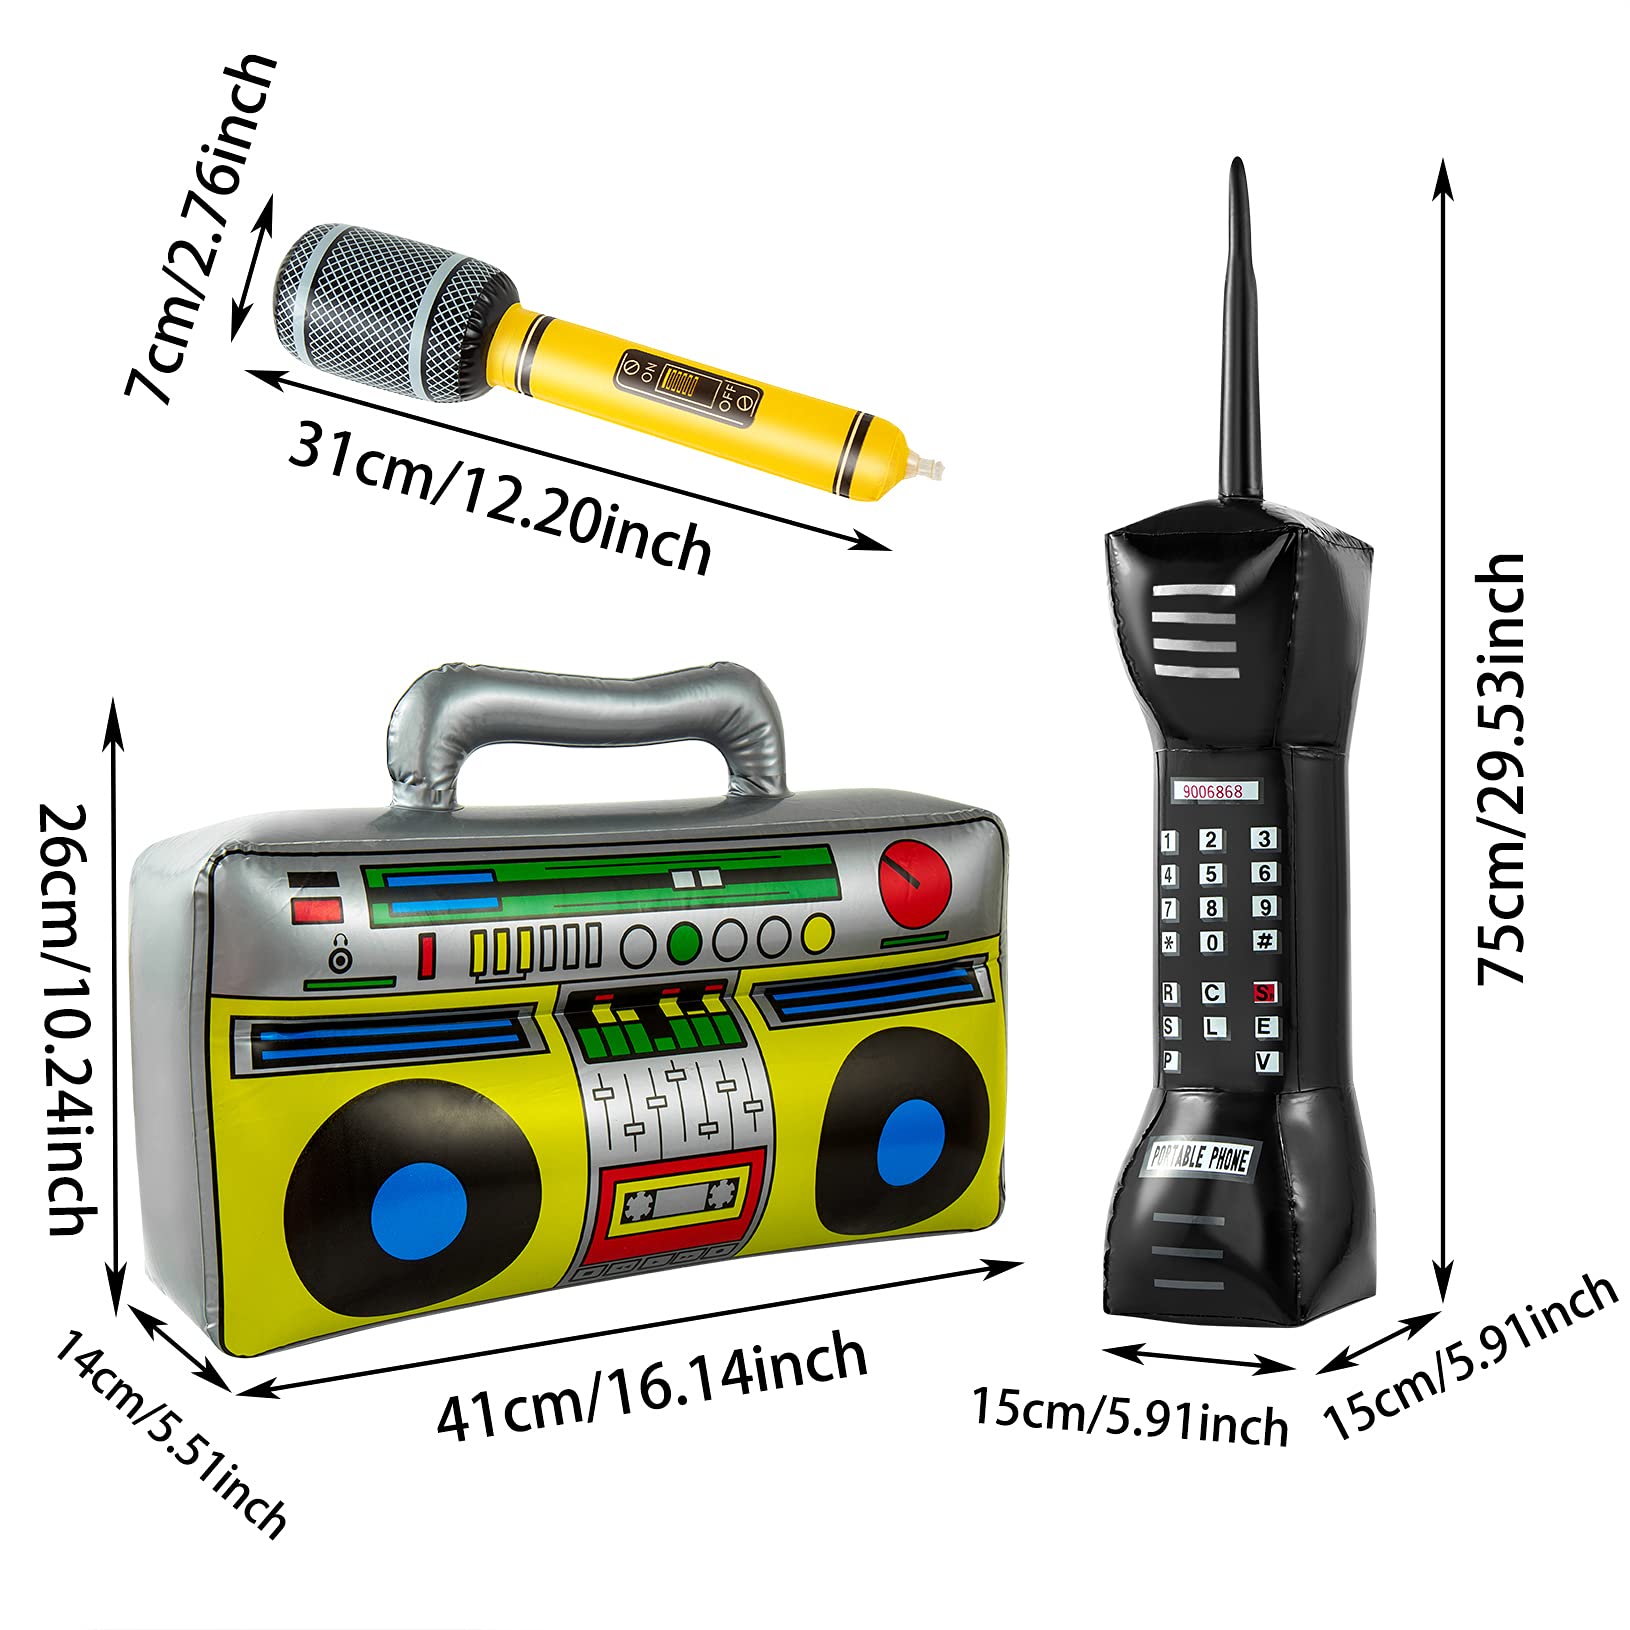 ONLYFU Inflatable Radio Boombox Inflatable Microphones Mobile Phone Props for 80s 90s Party Decorations, Hip Hop Theme Birthday Party Supplies 3pcs Inflatable Props